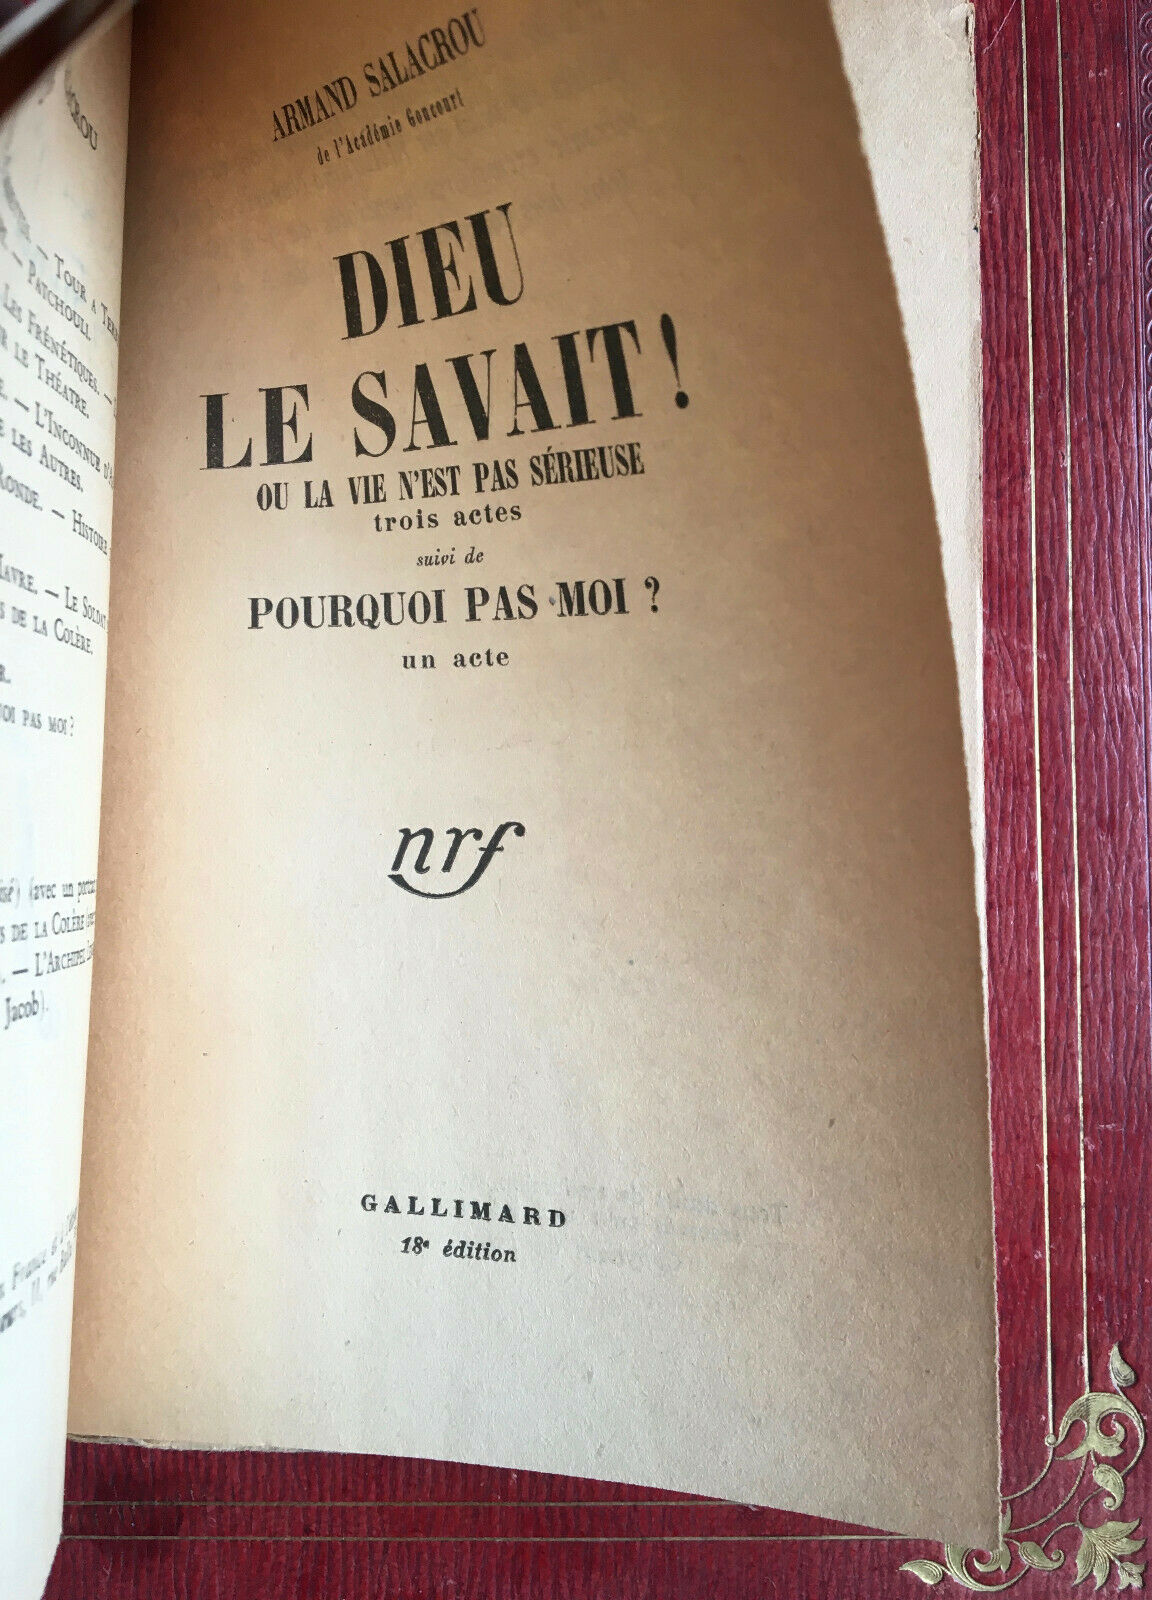 ARMAND SALACROU - GOD KNEW IT - SENDING THE AUTHOR AND THE ACTORS - GALLIMARD